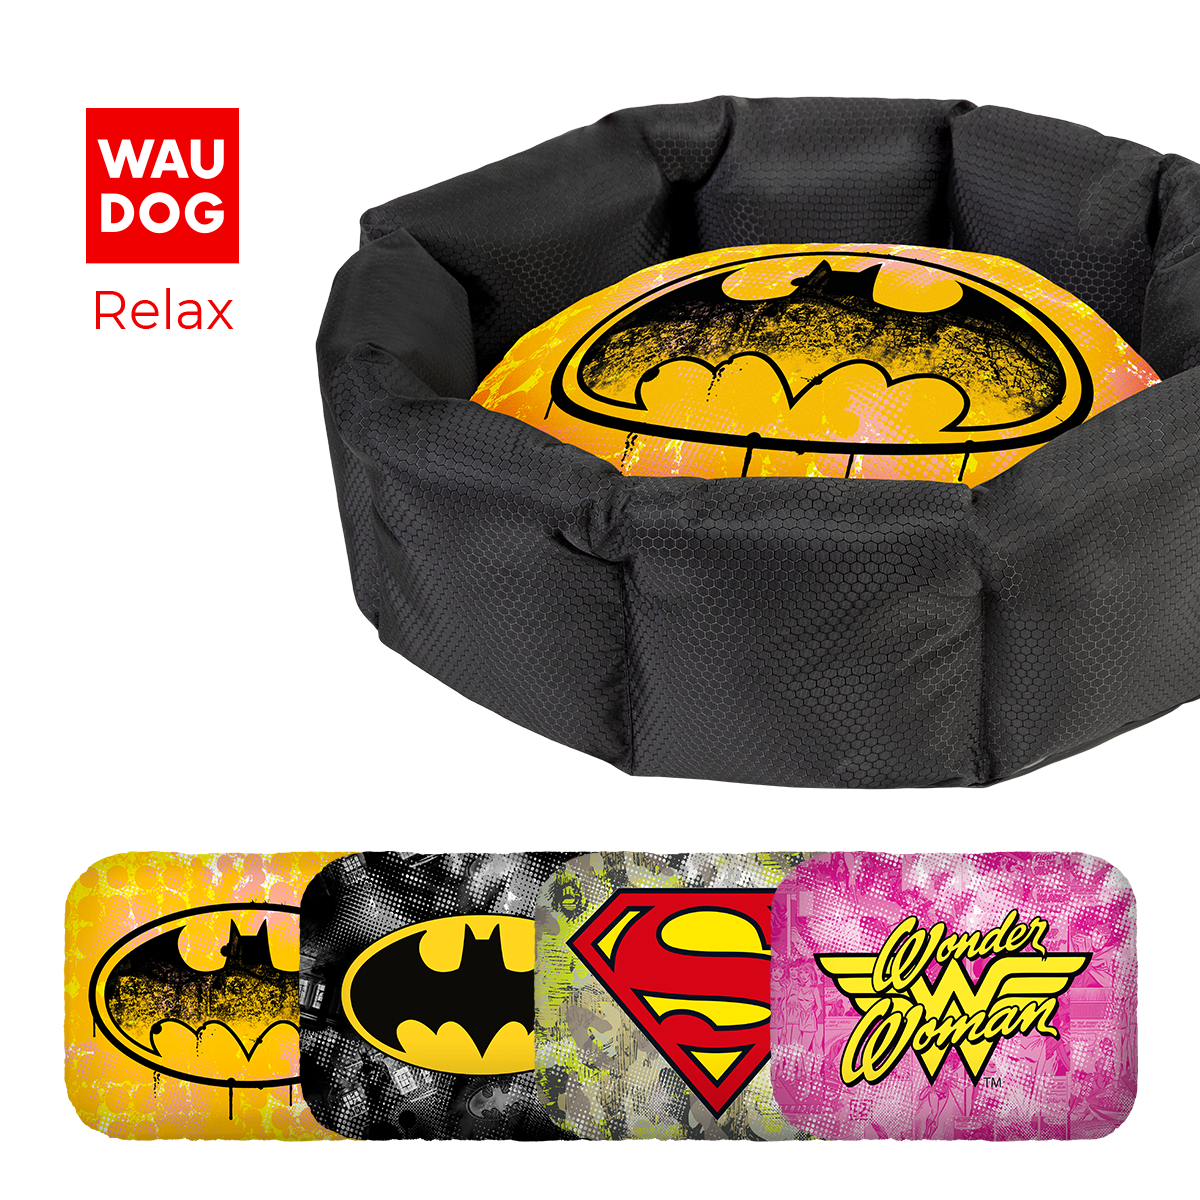 WAUDOG pet bed with replaceable pillows